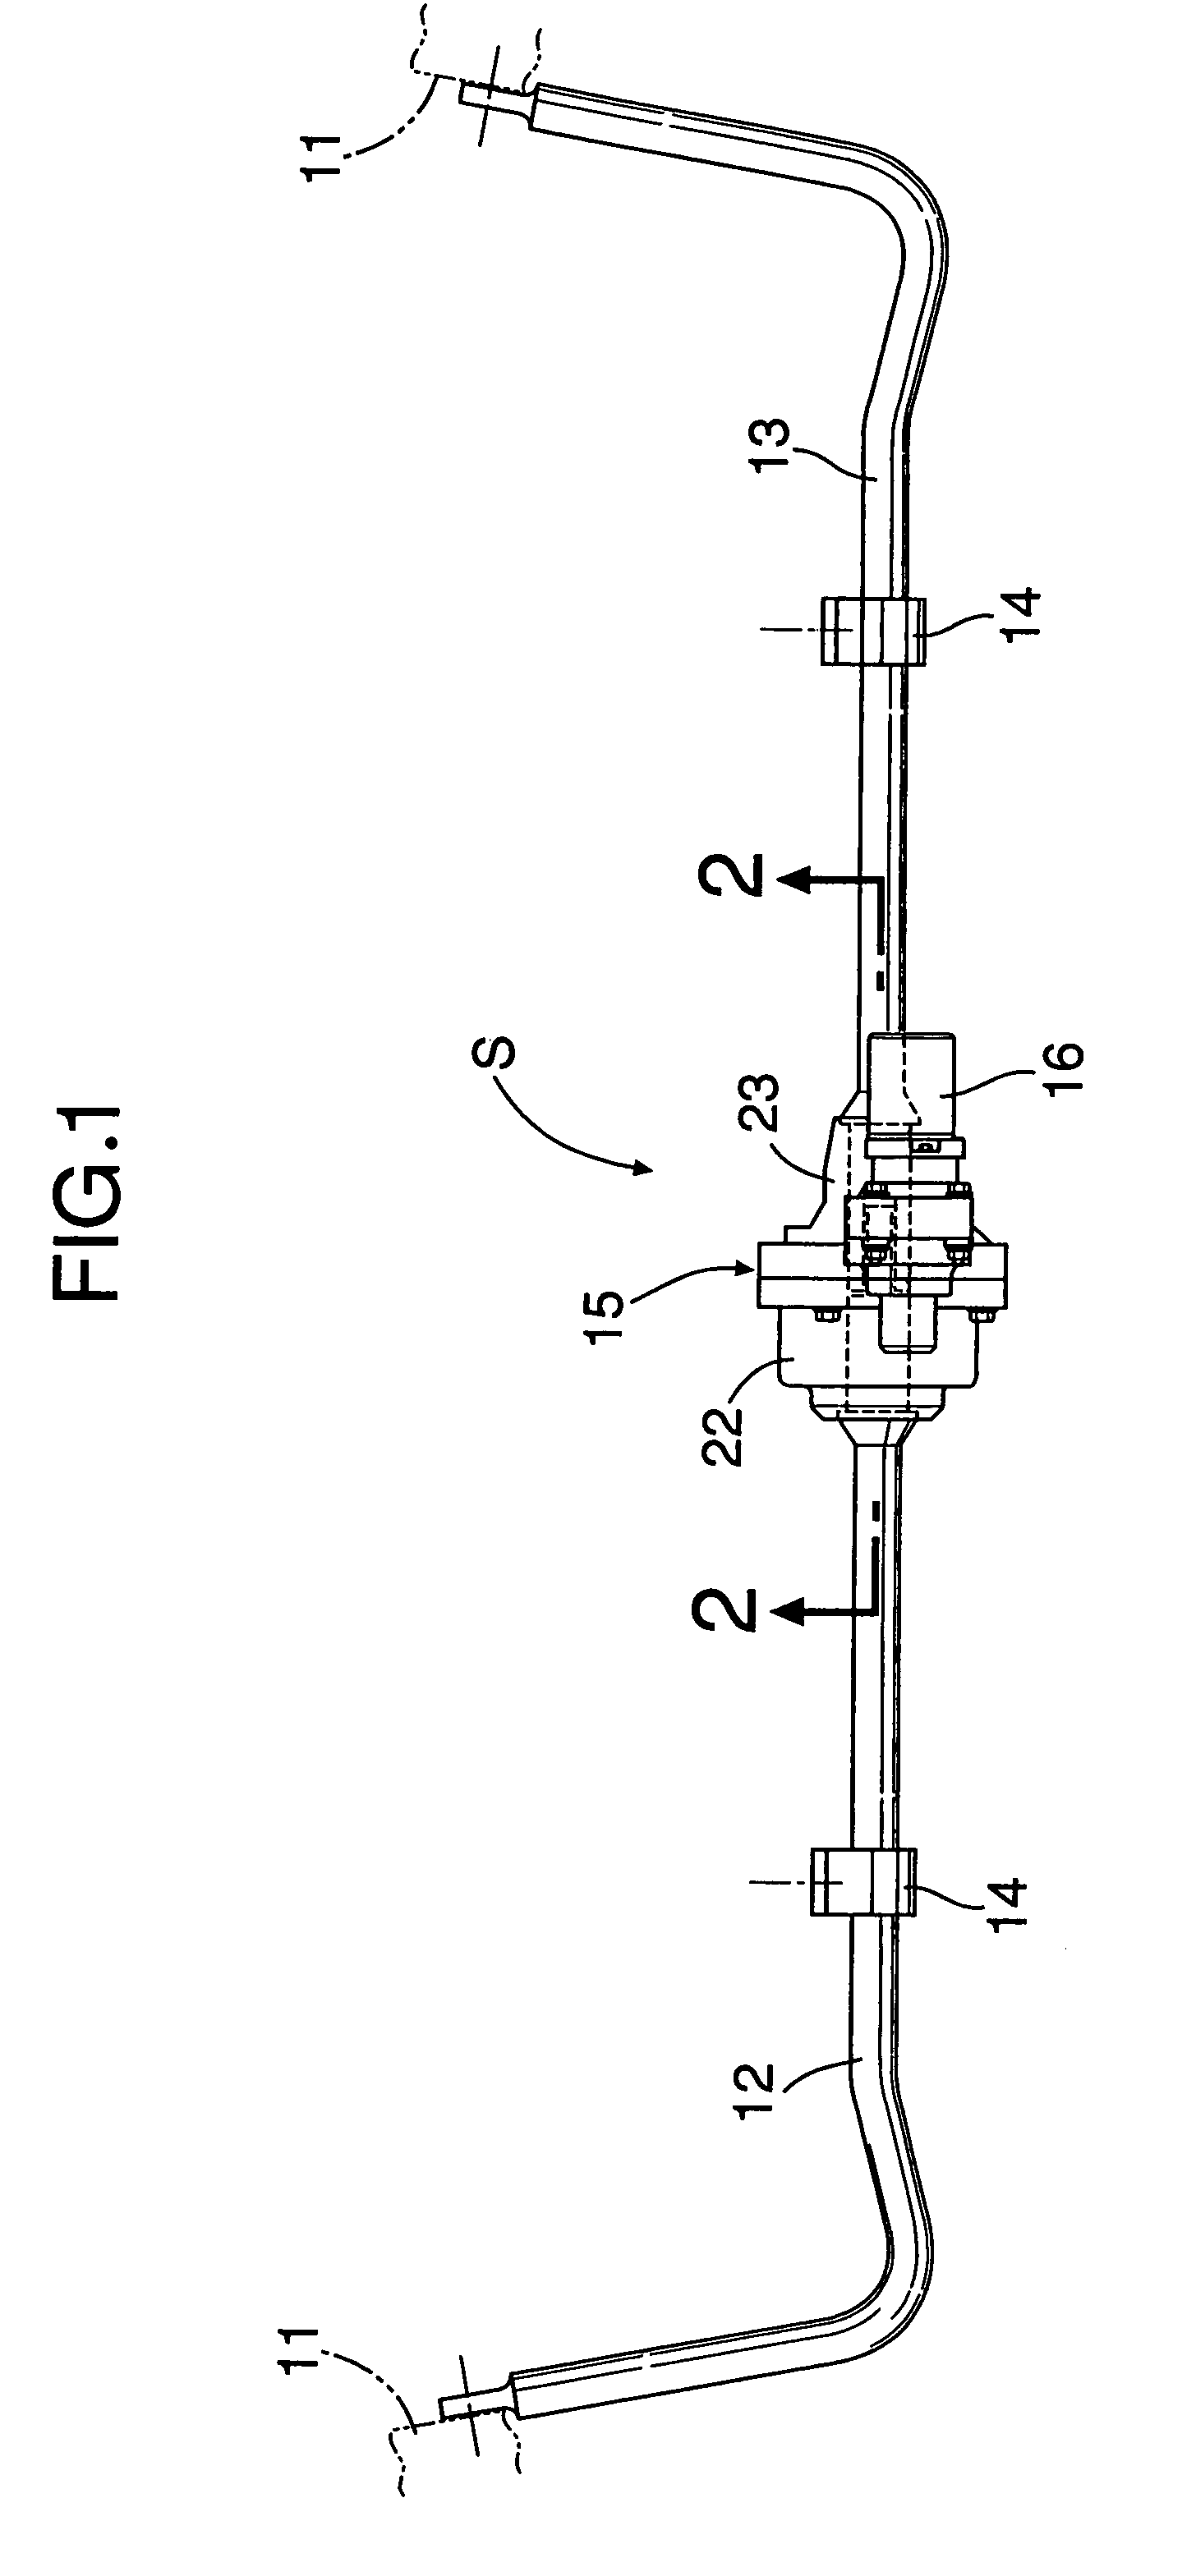 Reduction gear and vehicular active stabilizer system